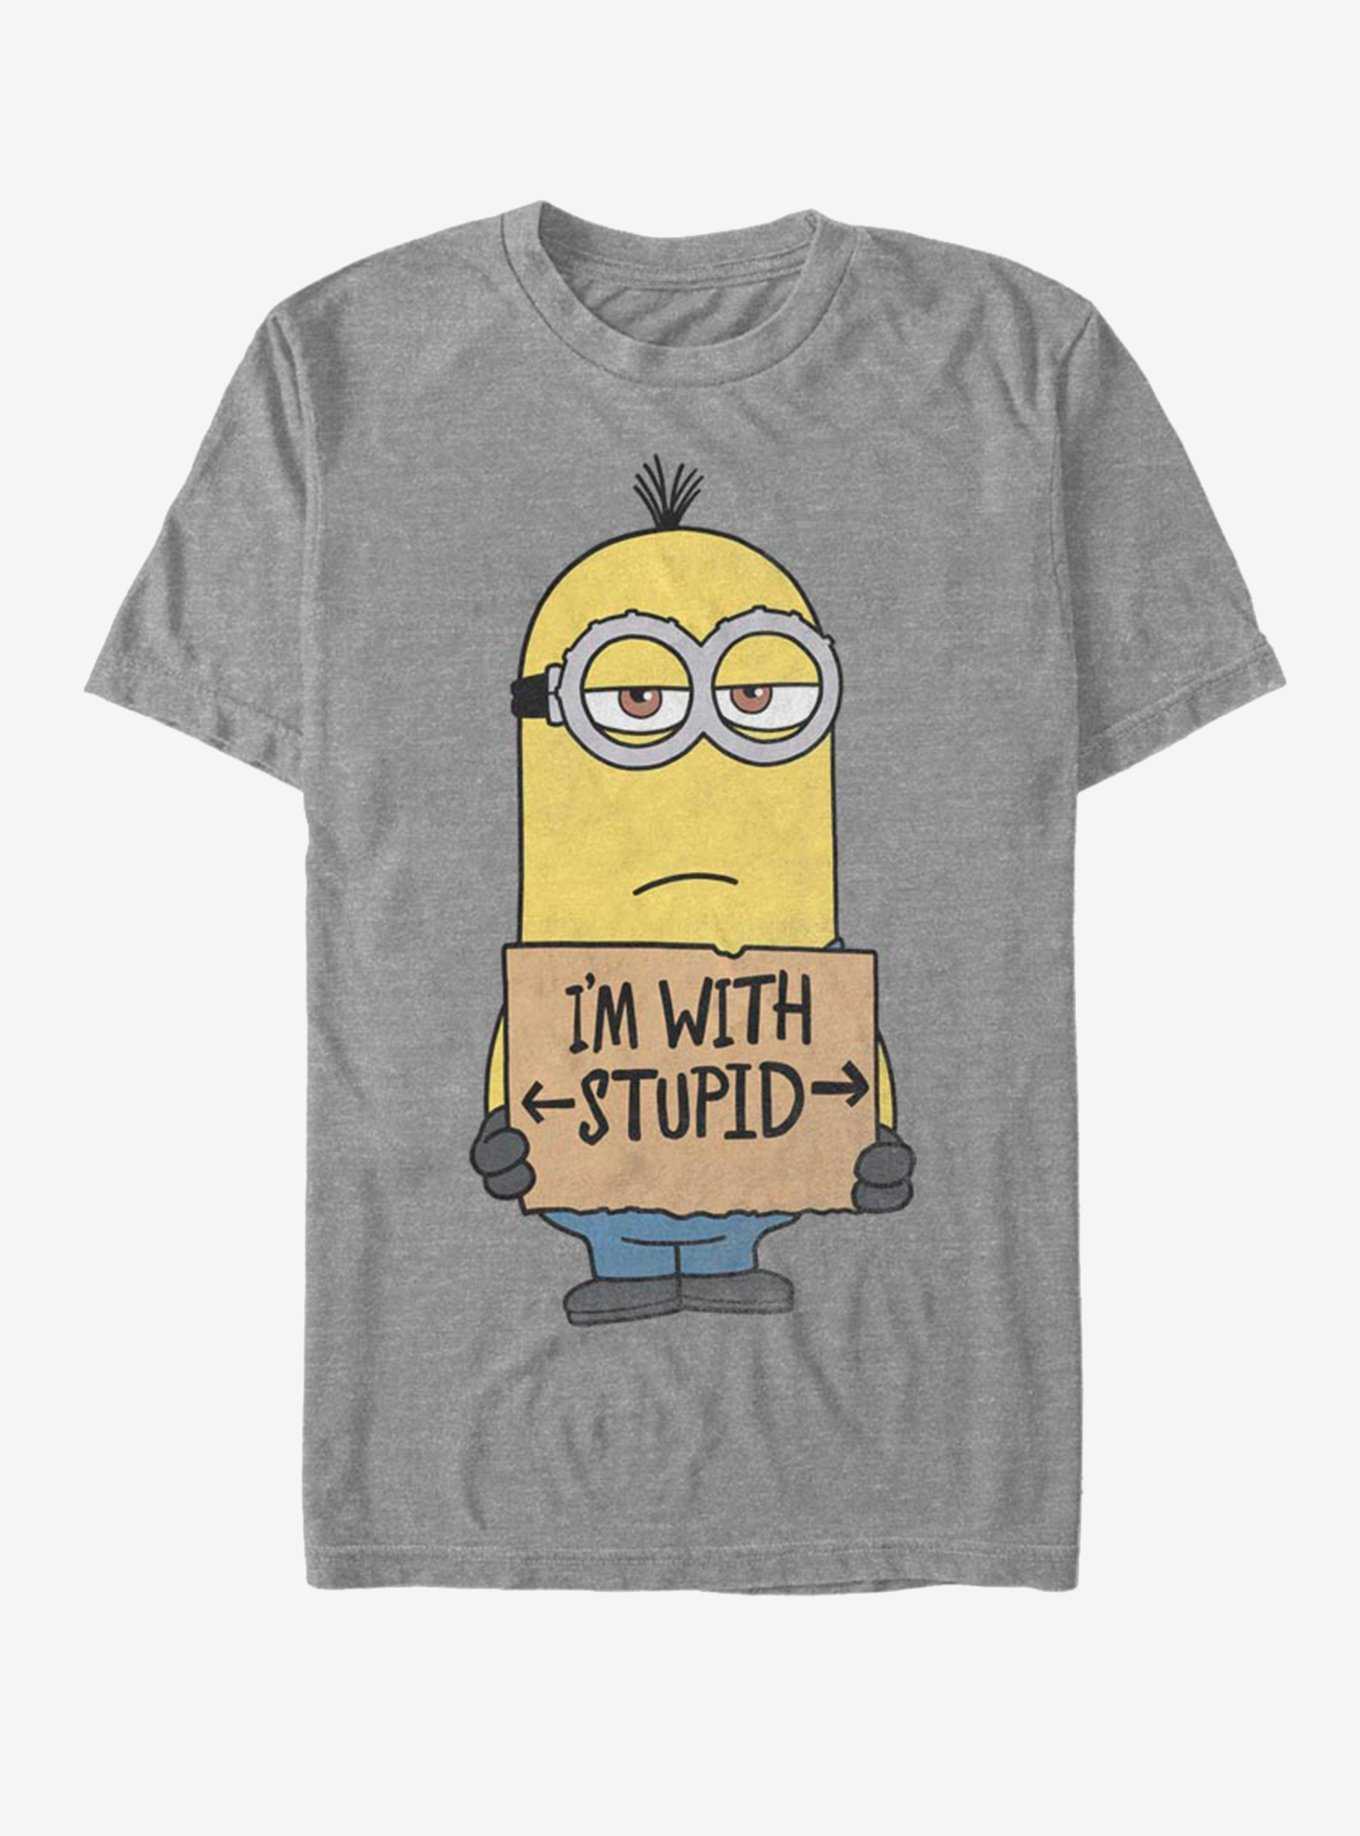 OFFICIAL Minions Shirts and Merch | BoxLunch Gifts